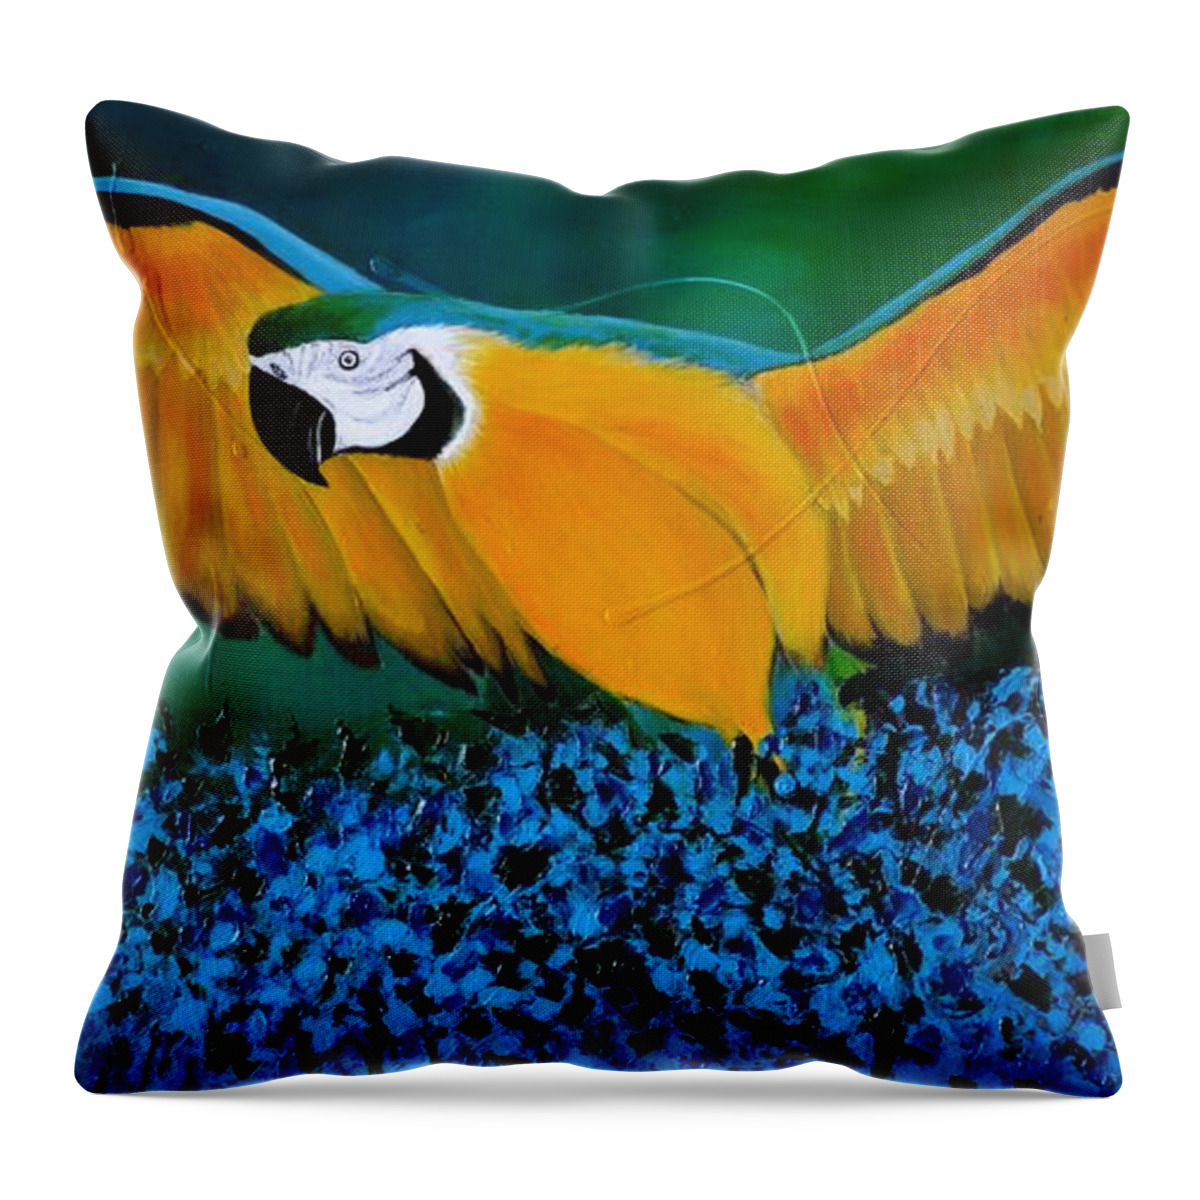 Macaw Throw Pillow featuring the painting Macaw On The Rise by Preethi Mathialagan